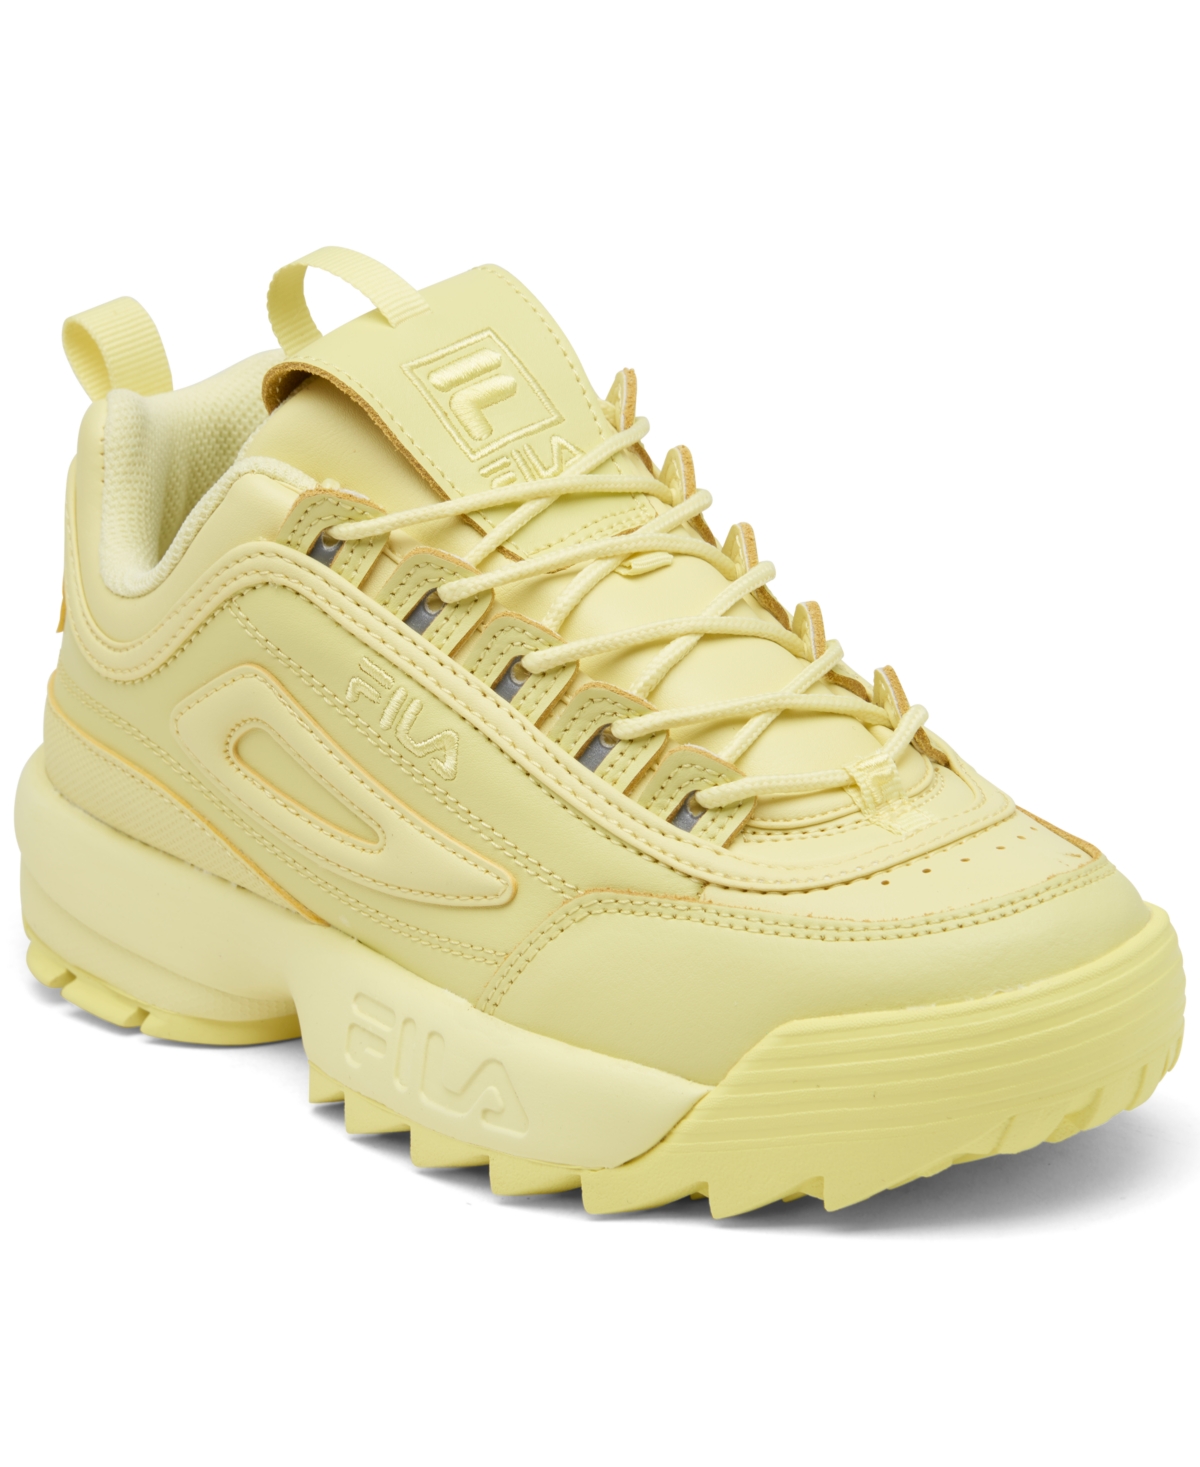 Fila Women's Disruptor Ii Premium Casual Athletic Sneakers From Finish Line In Tender Yellow/tender Yellow